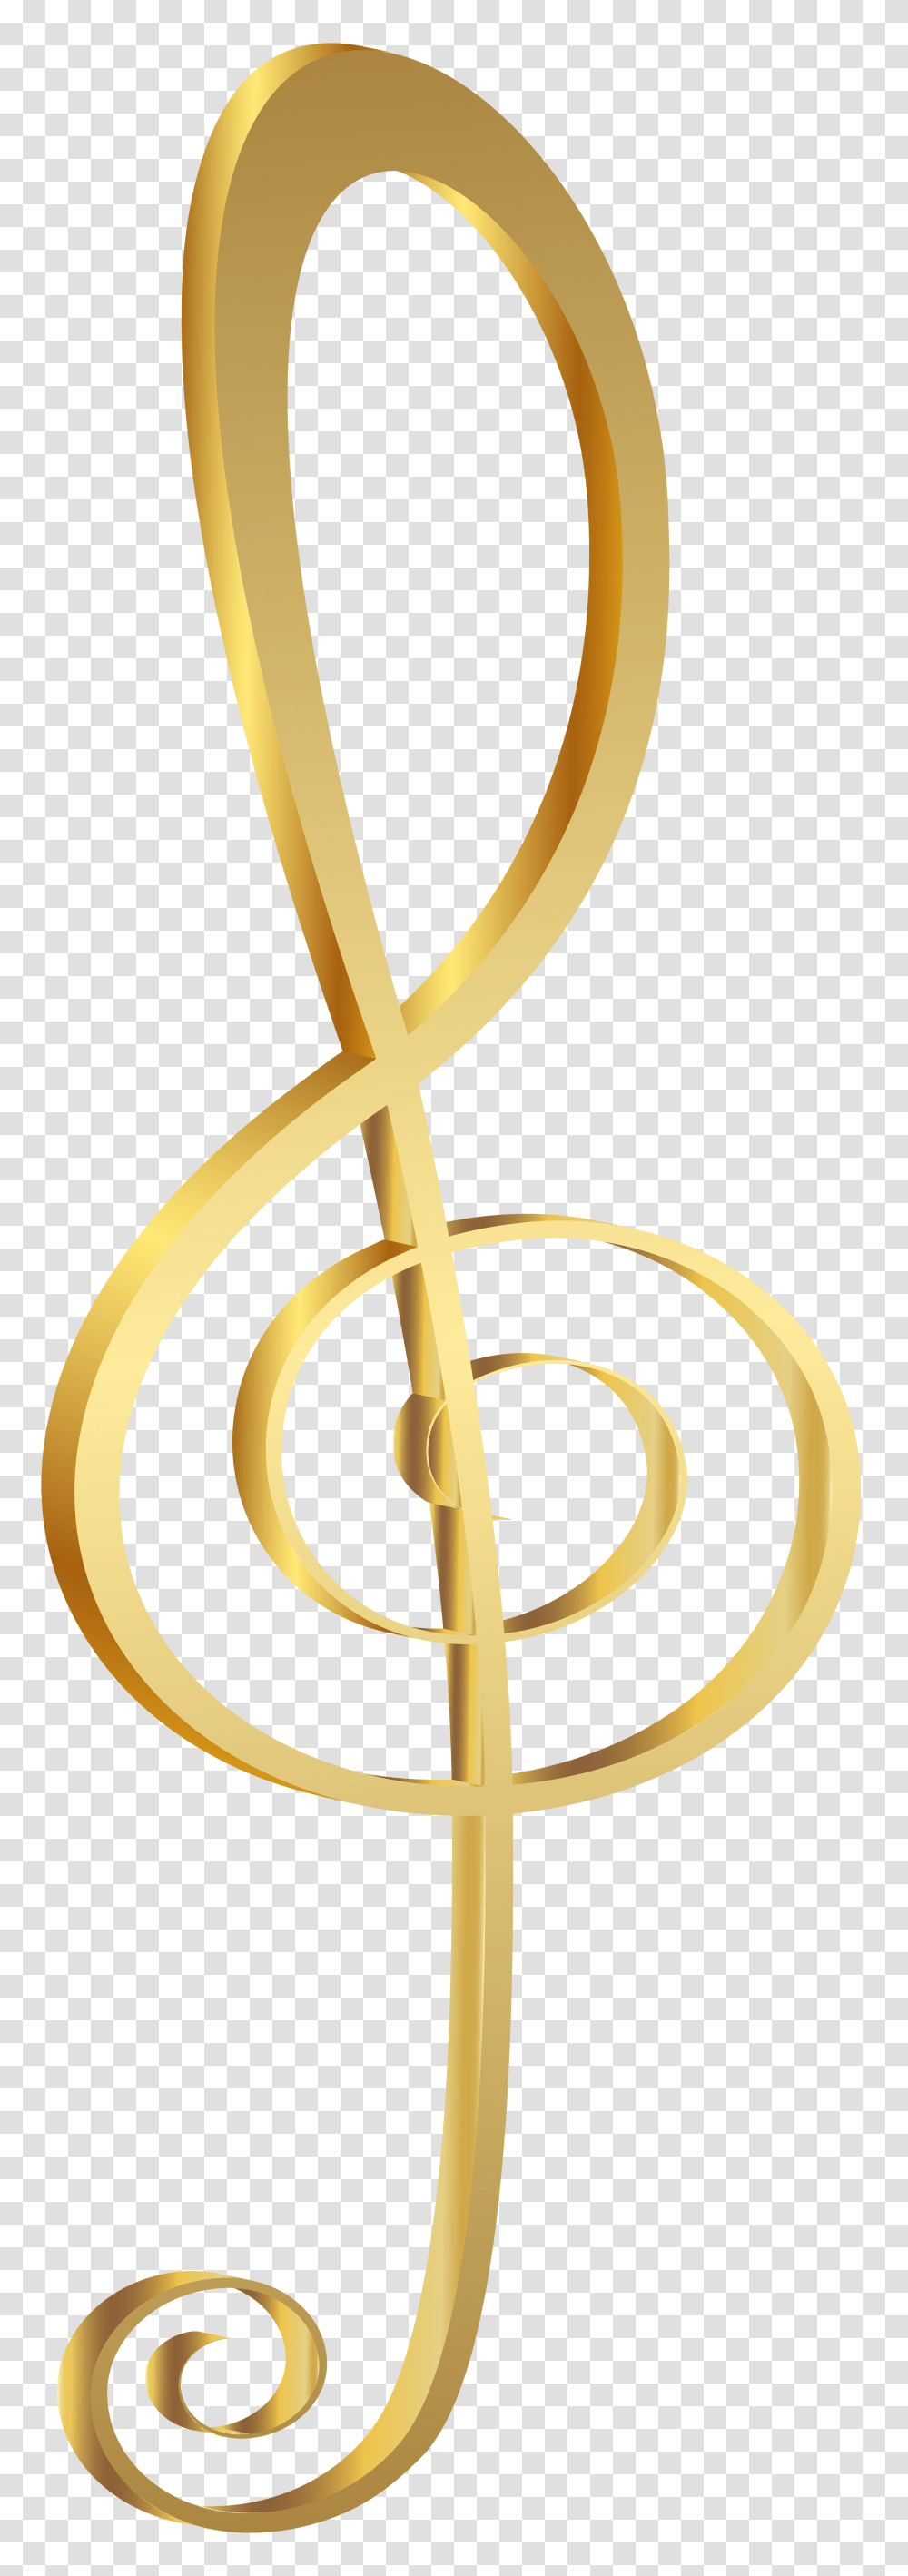 Clef, Wax Seal, Lamp, Musical Instrument Transparent Png